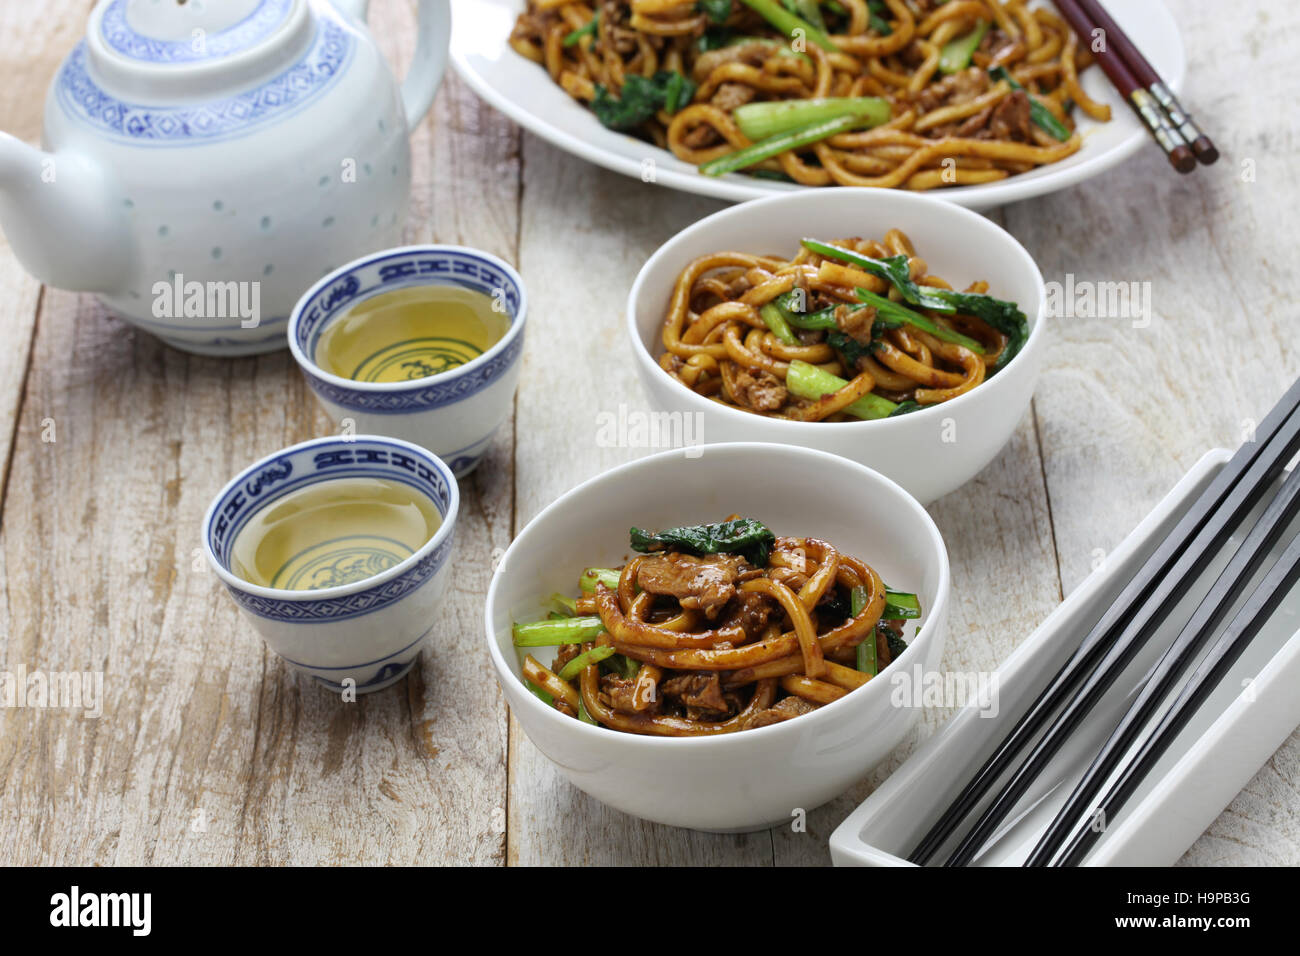 Shanghai fried noodle, Shanghai chow mein, chinese food Stock Photo - Alamy